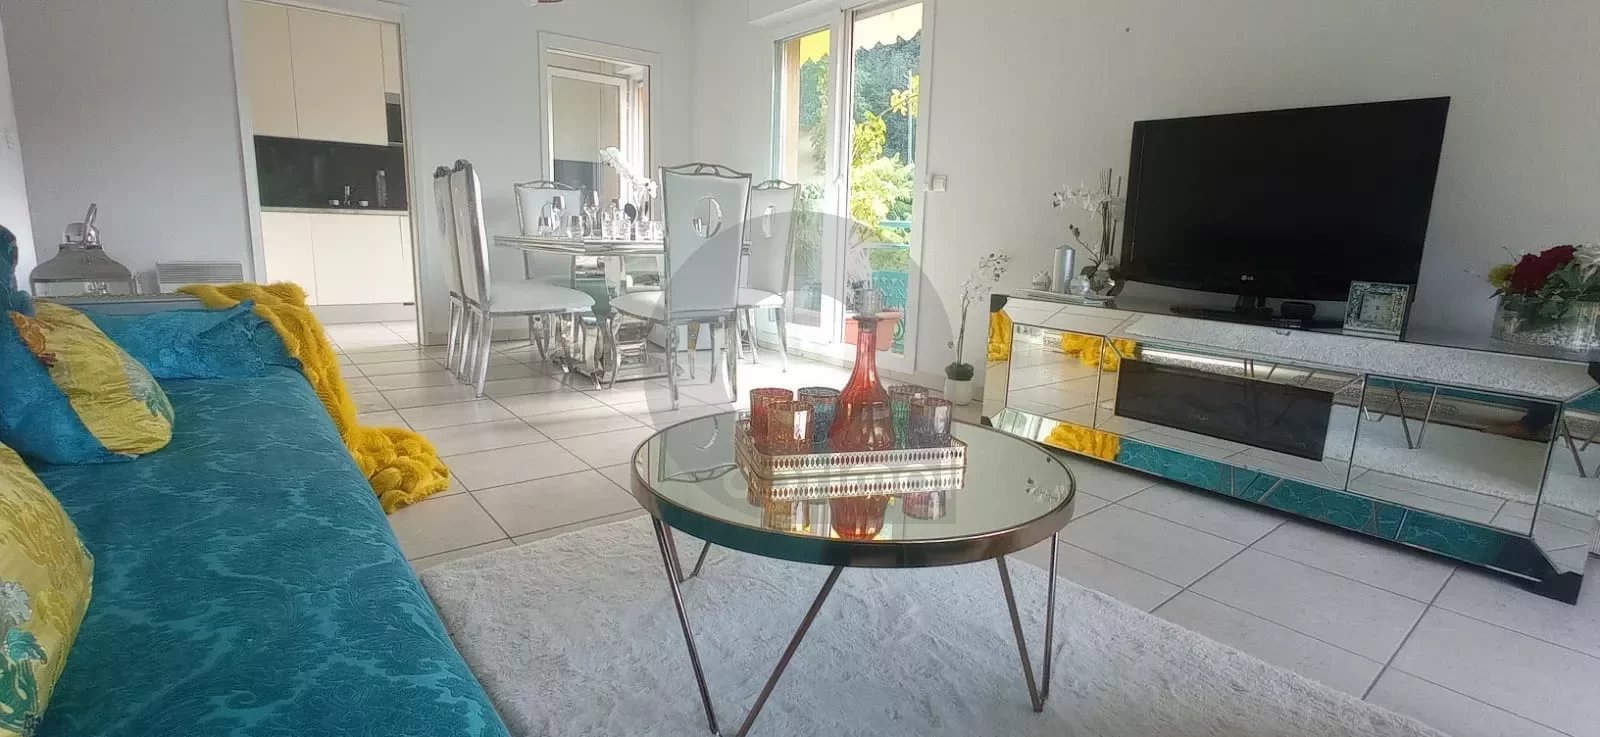 ROQUEBRUNE CAP-MARTIN: BEAUTIFUL APARTMENT WITH TERRACE - RESIDENCE WITH SWIMMING POOL